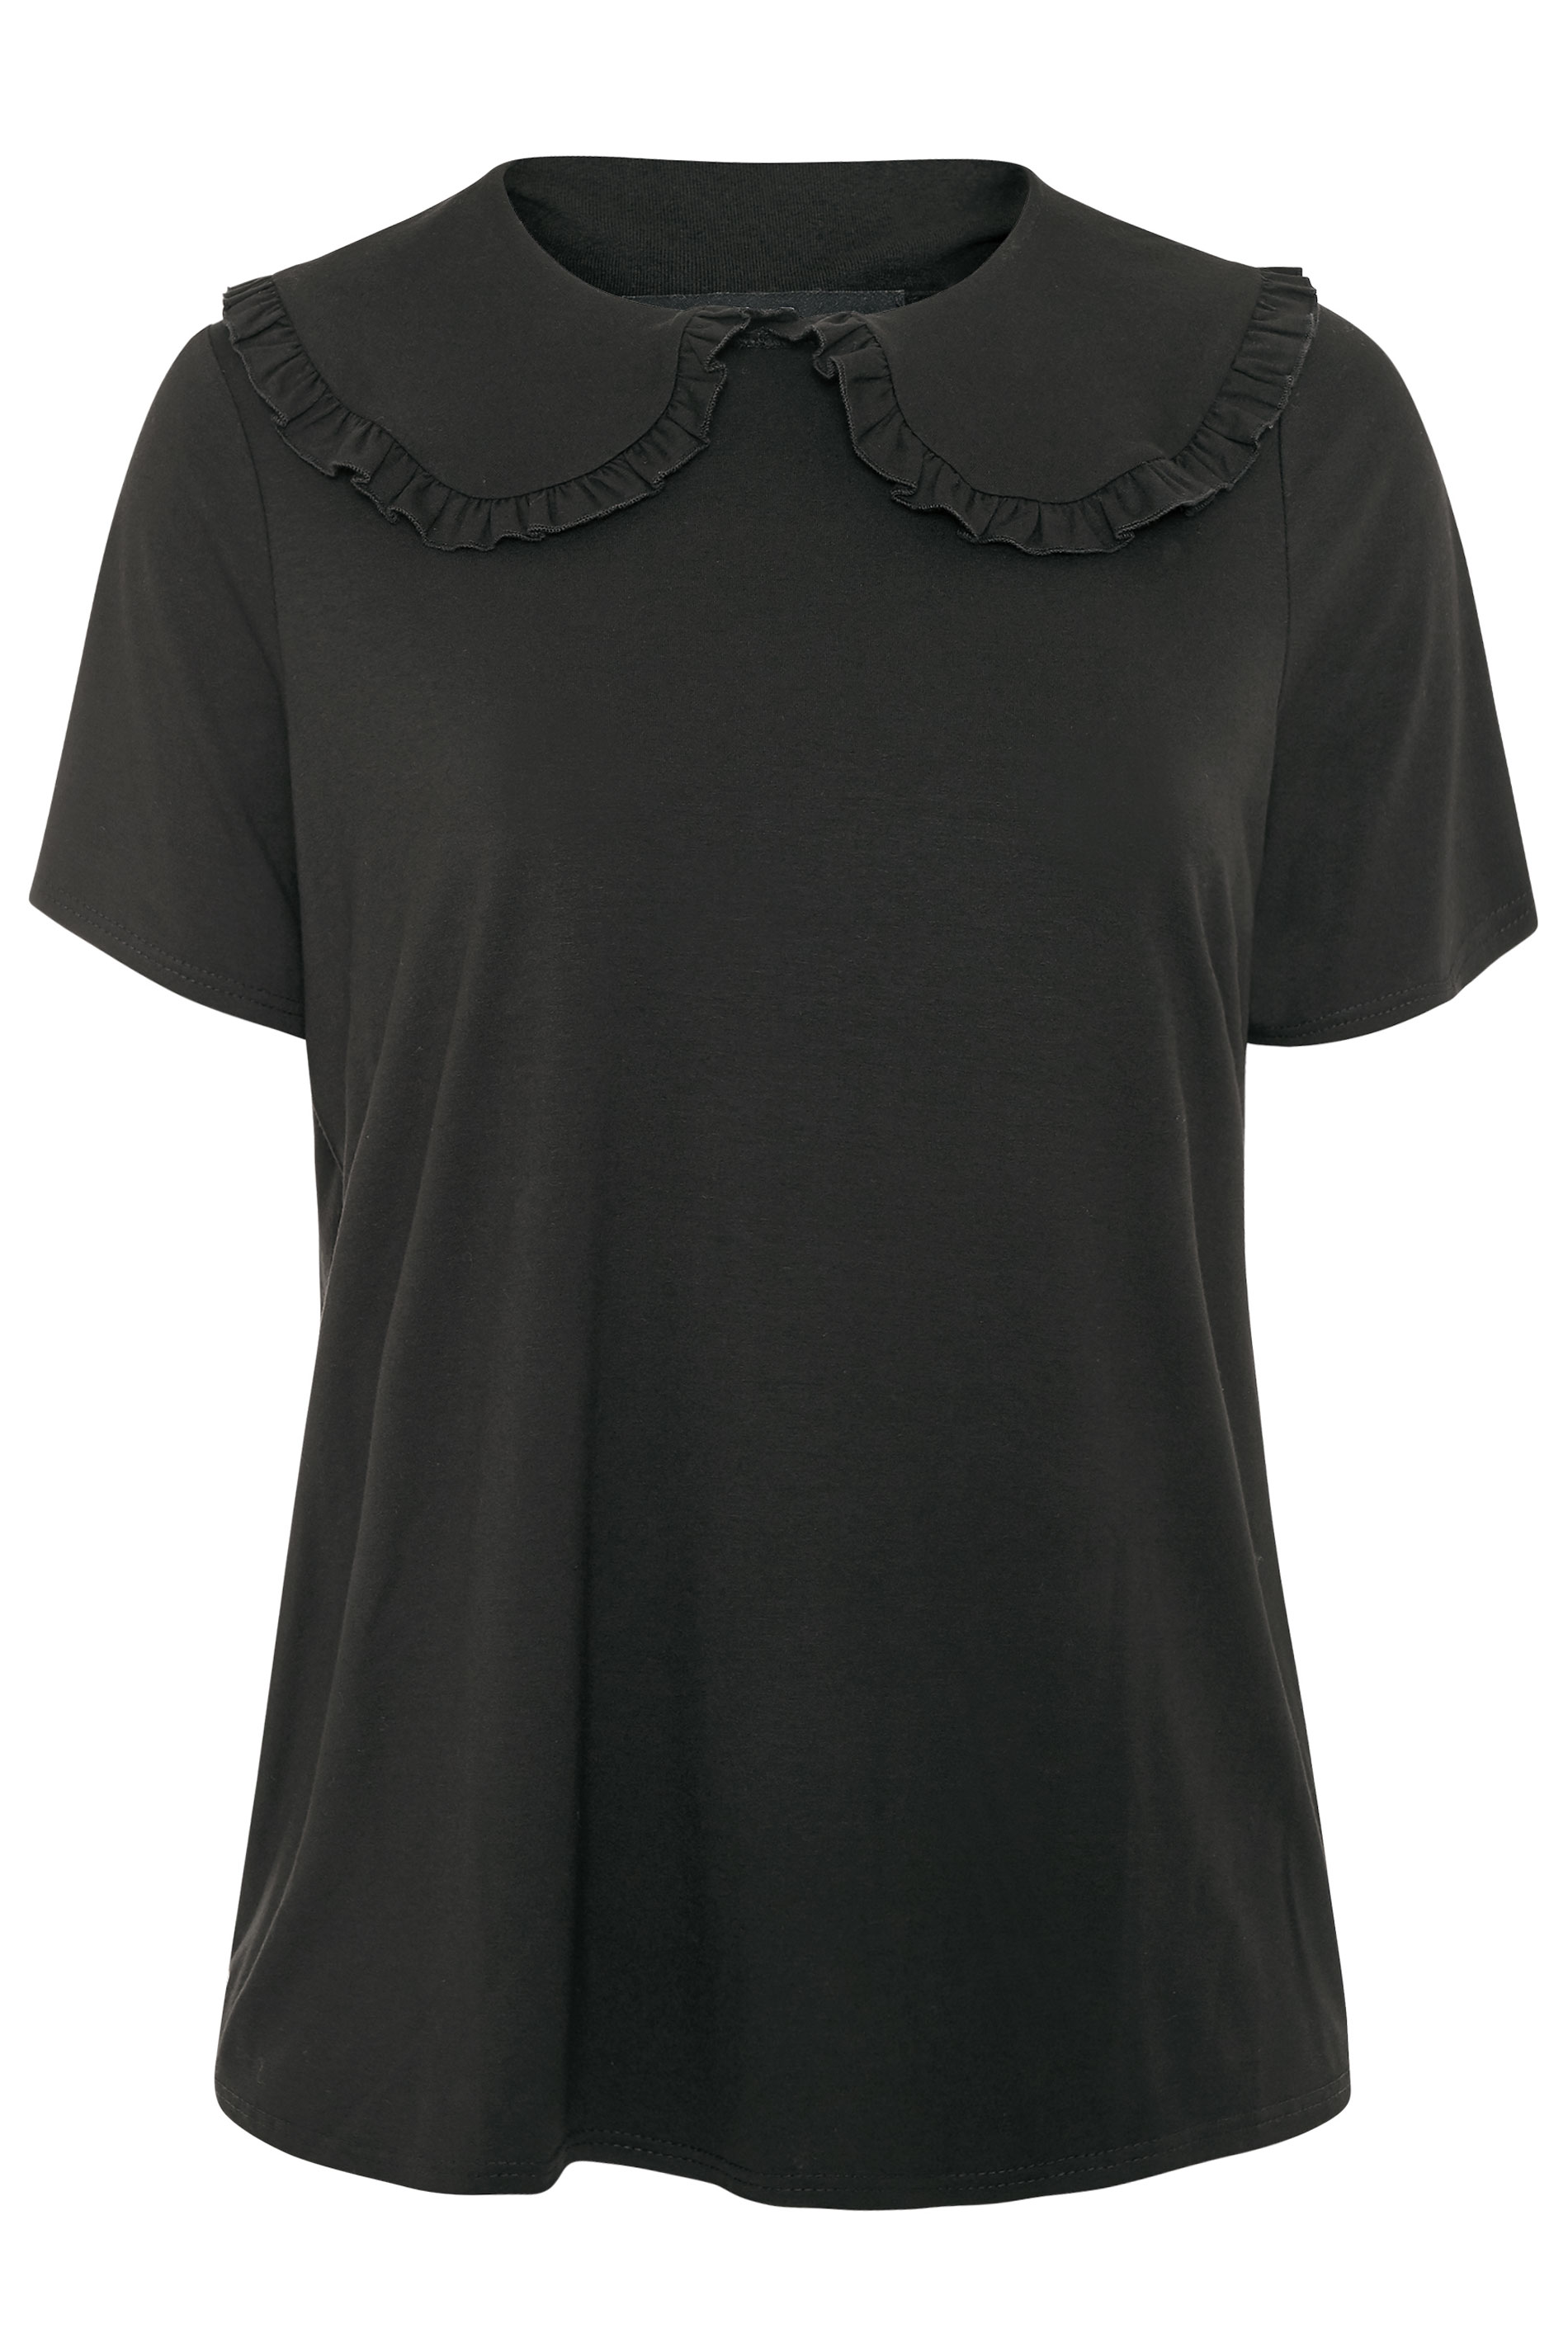 LIMITED COLLECTION Black Frill Collar Top | Yours Clothing